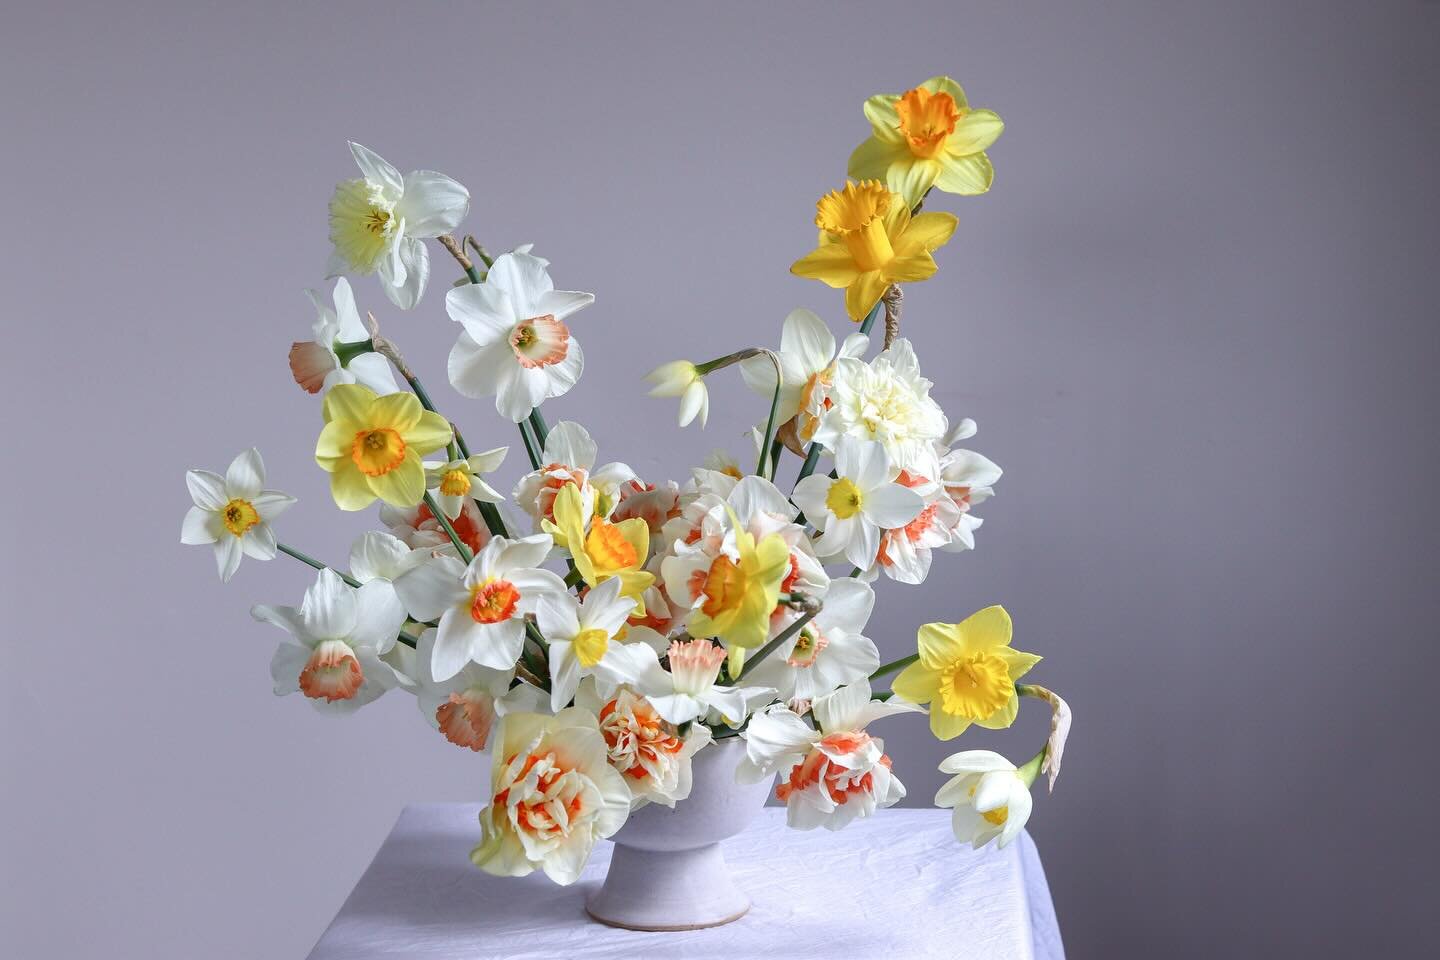 Cut all the narcissi. Arrange in bowl. The end. 

#march #narcissus #daffodils #springflowers #seasonledfloristry #cambridgeflorist #seasonalandsustainable #florartistry #locallygrownflowers